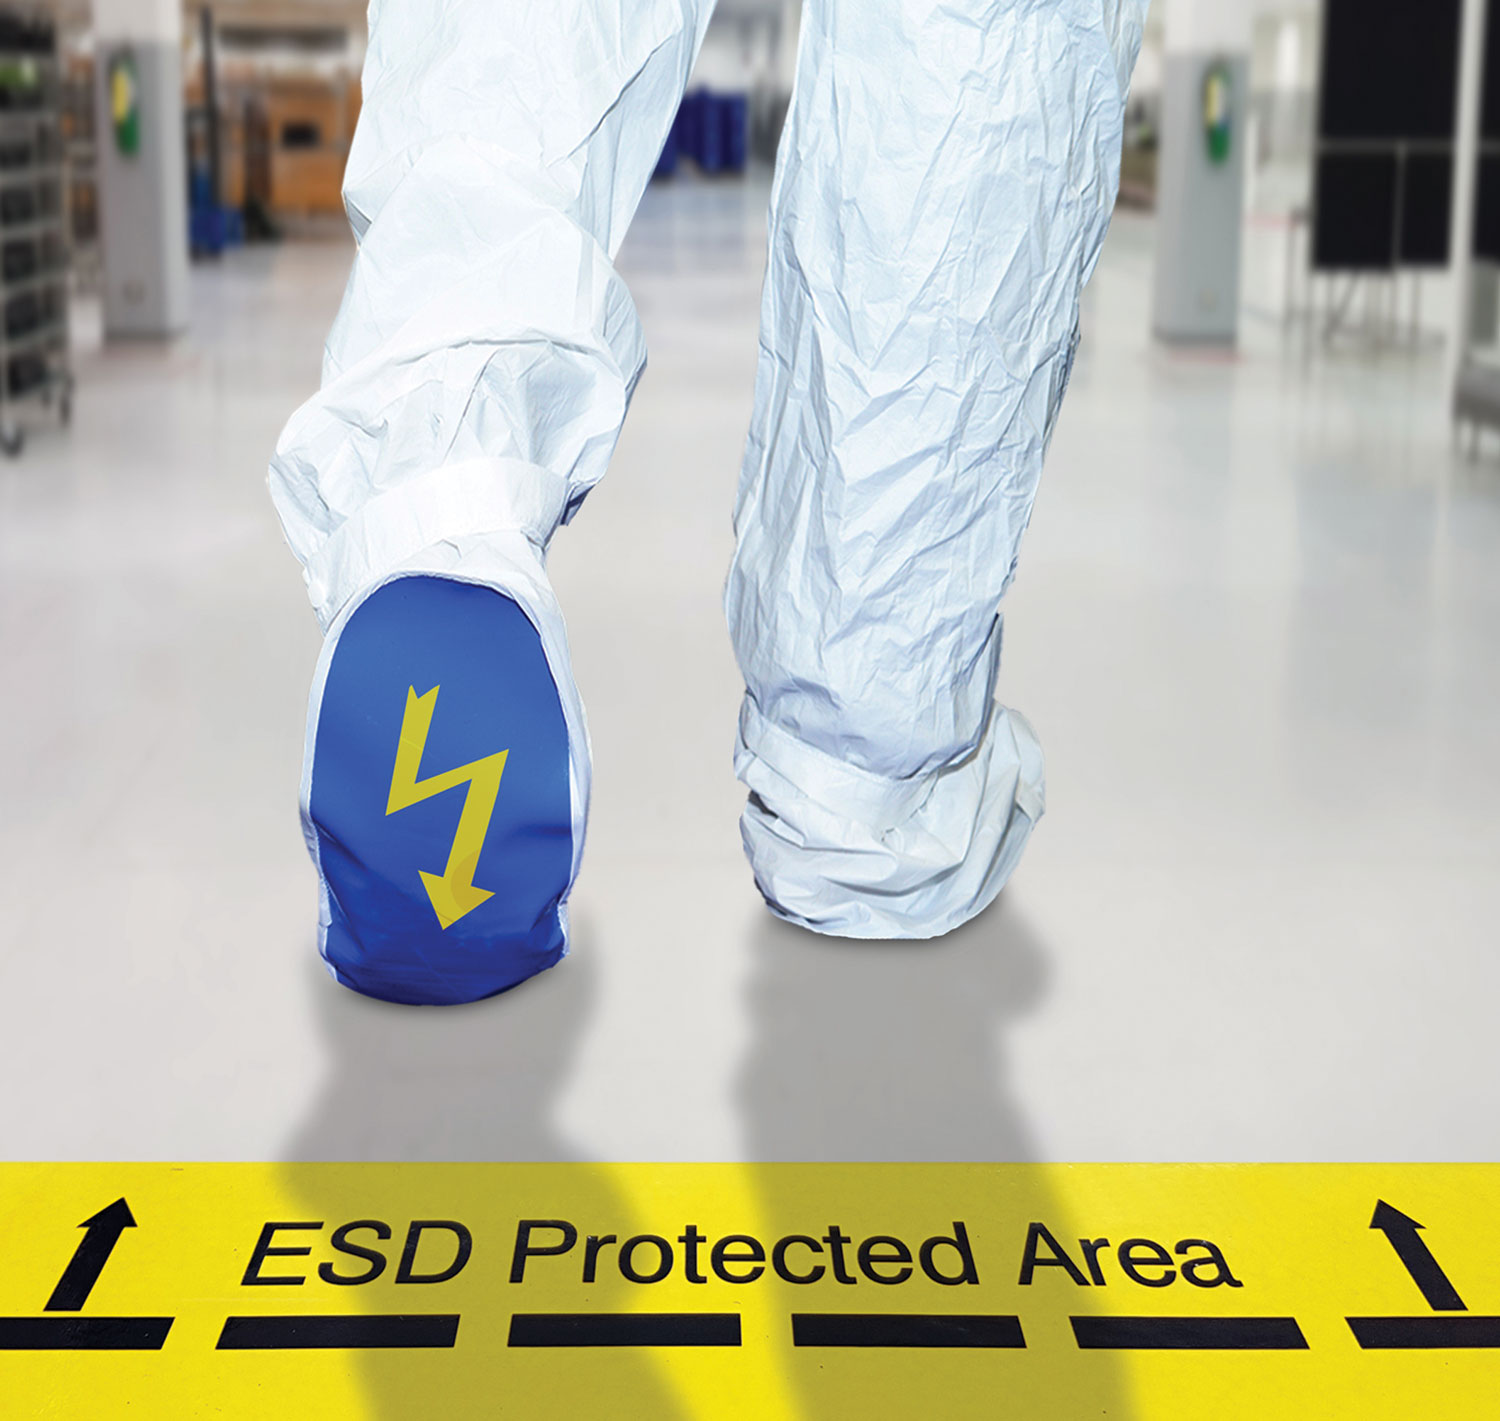 worker wearing static suit walking over floor signage reading "ESD Protected Area"